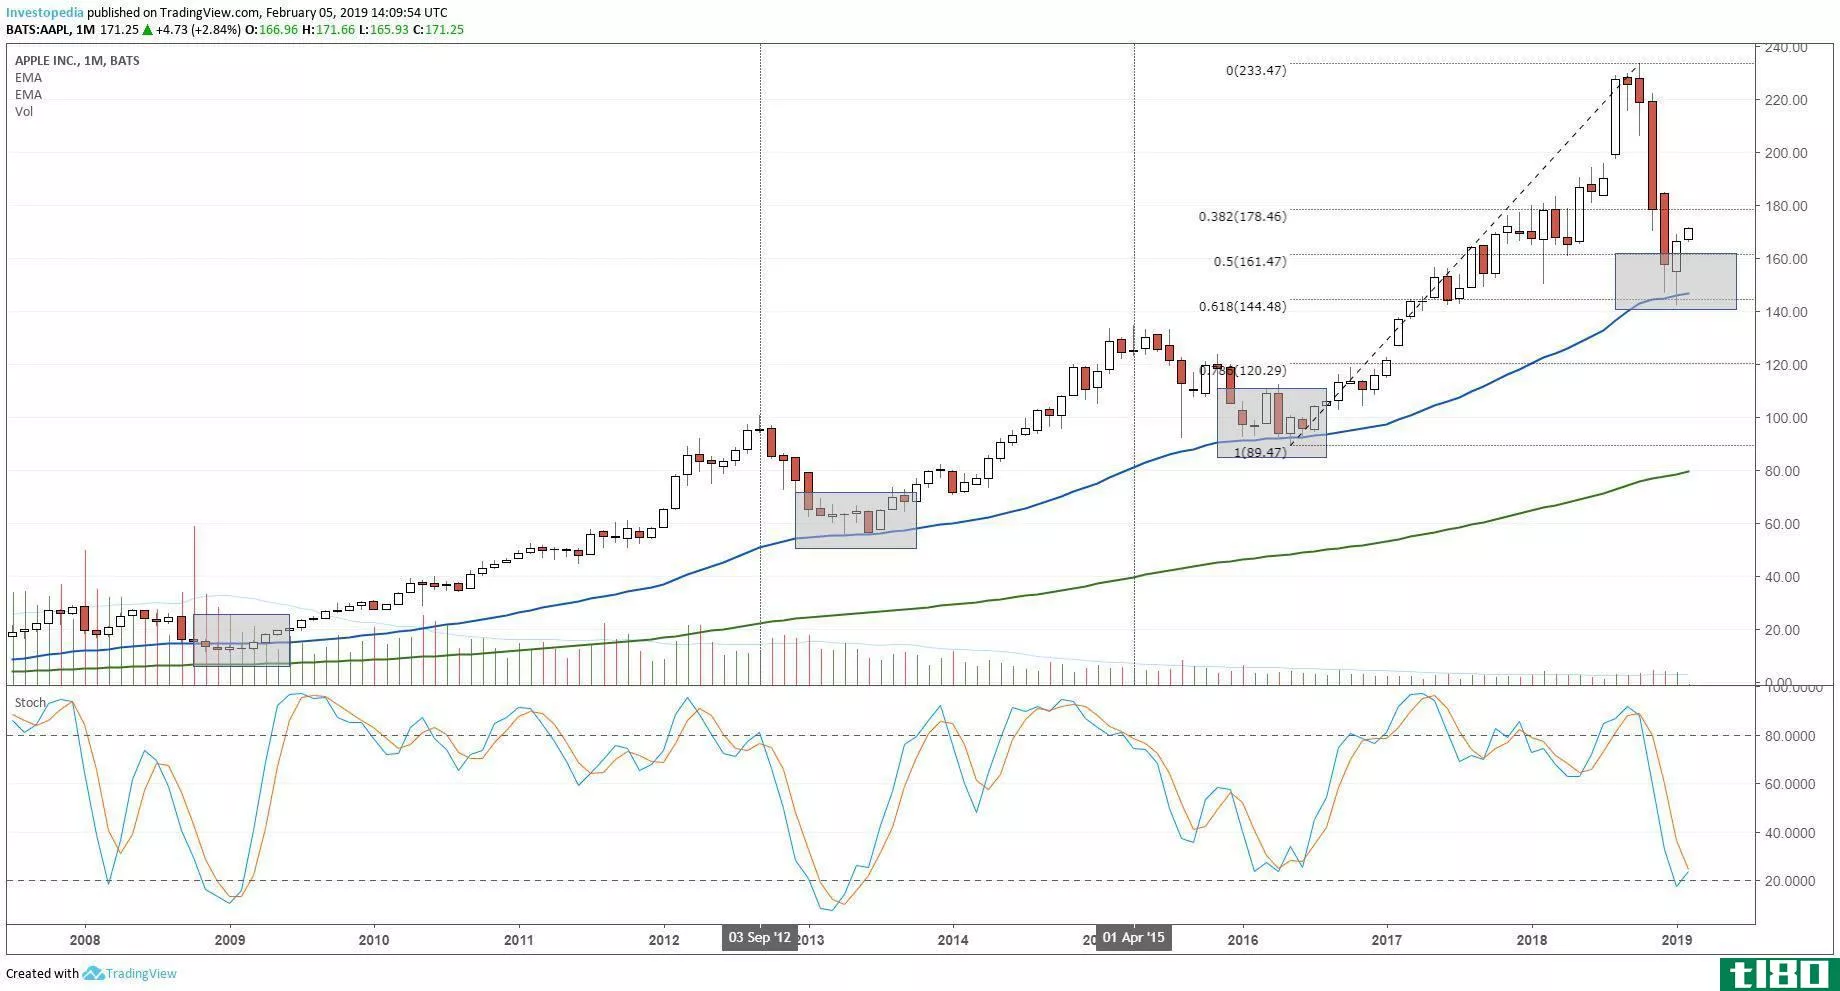 Technical chart showing the share price performance of Apple Inc. (AAPL)